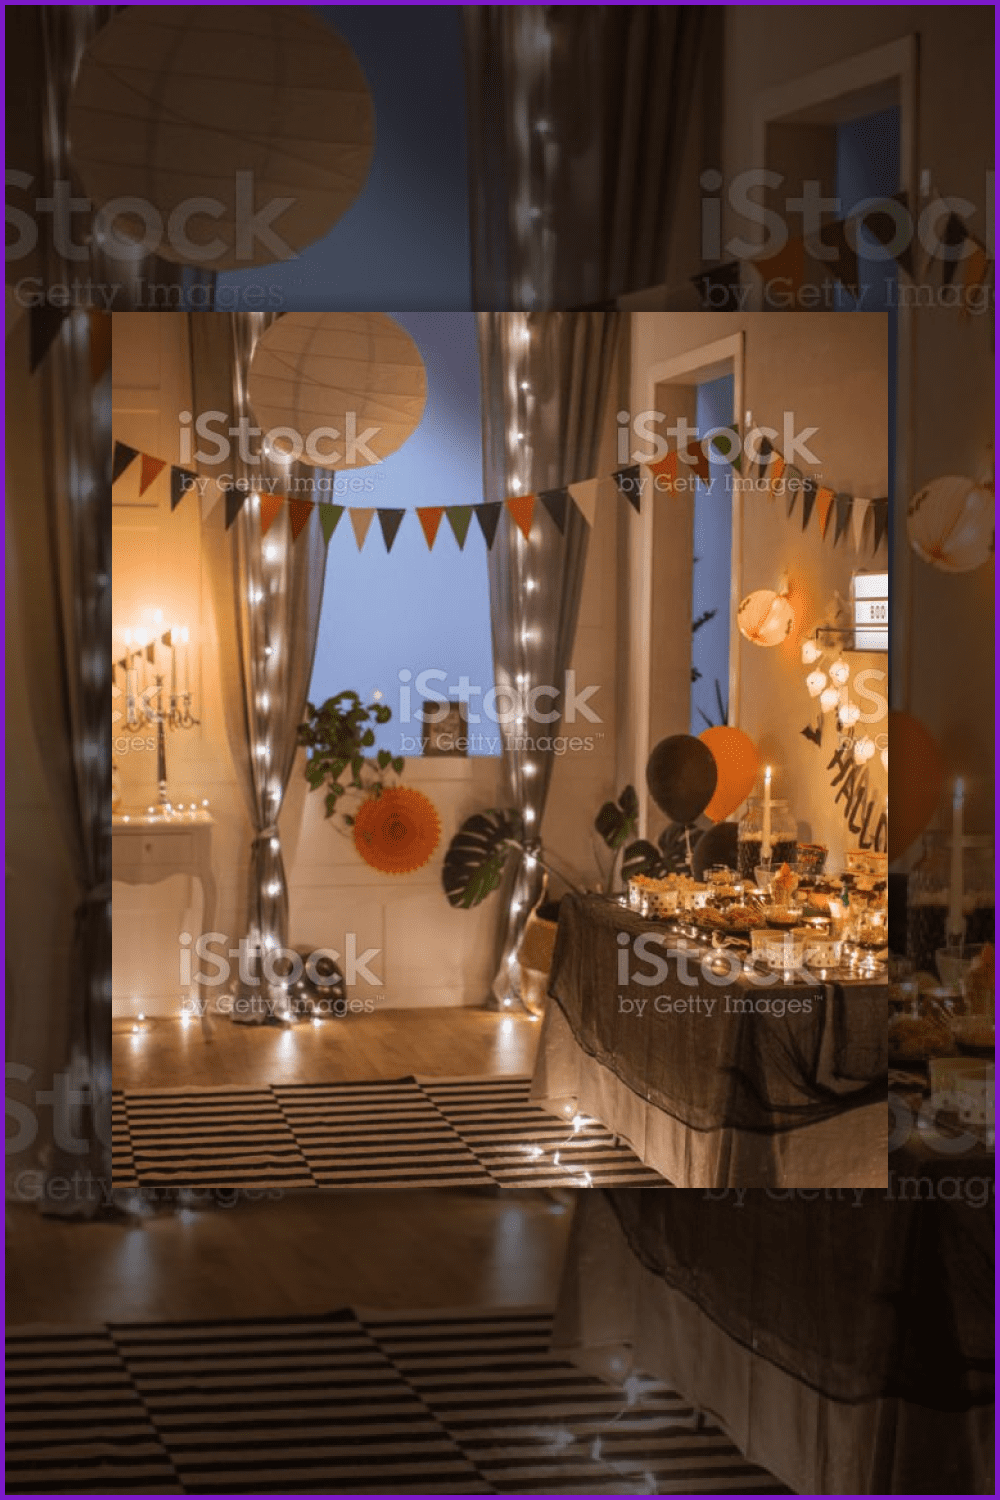 Festive table in a room with bright illumination.